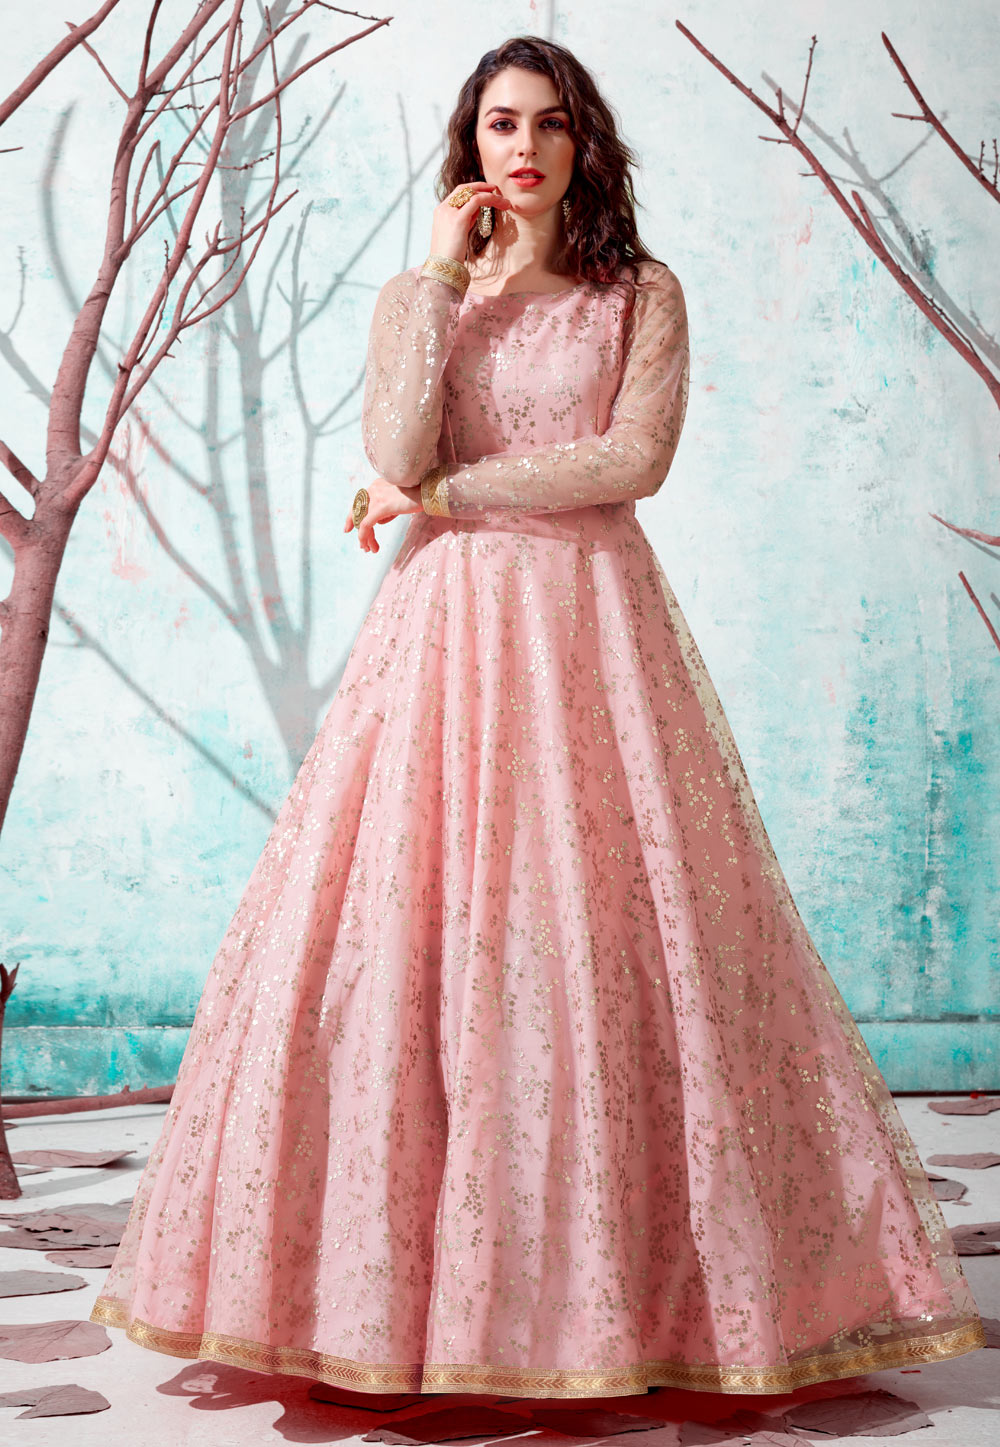 15706 LATEST READYMADE STYLISH PARTY WEAR DESIGNER WEDDING LONG GOWN BEST  OUTFIT SUPPLIER IN INDIA AUSTRALIA LONDON - Reewaz International |  Wholesaler & Exporter of indian ethnic wear catalogs.